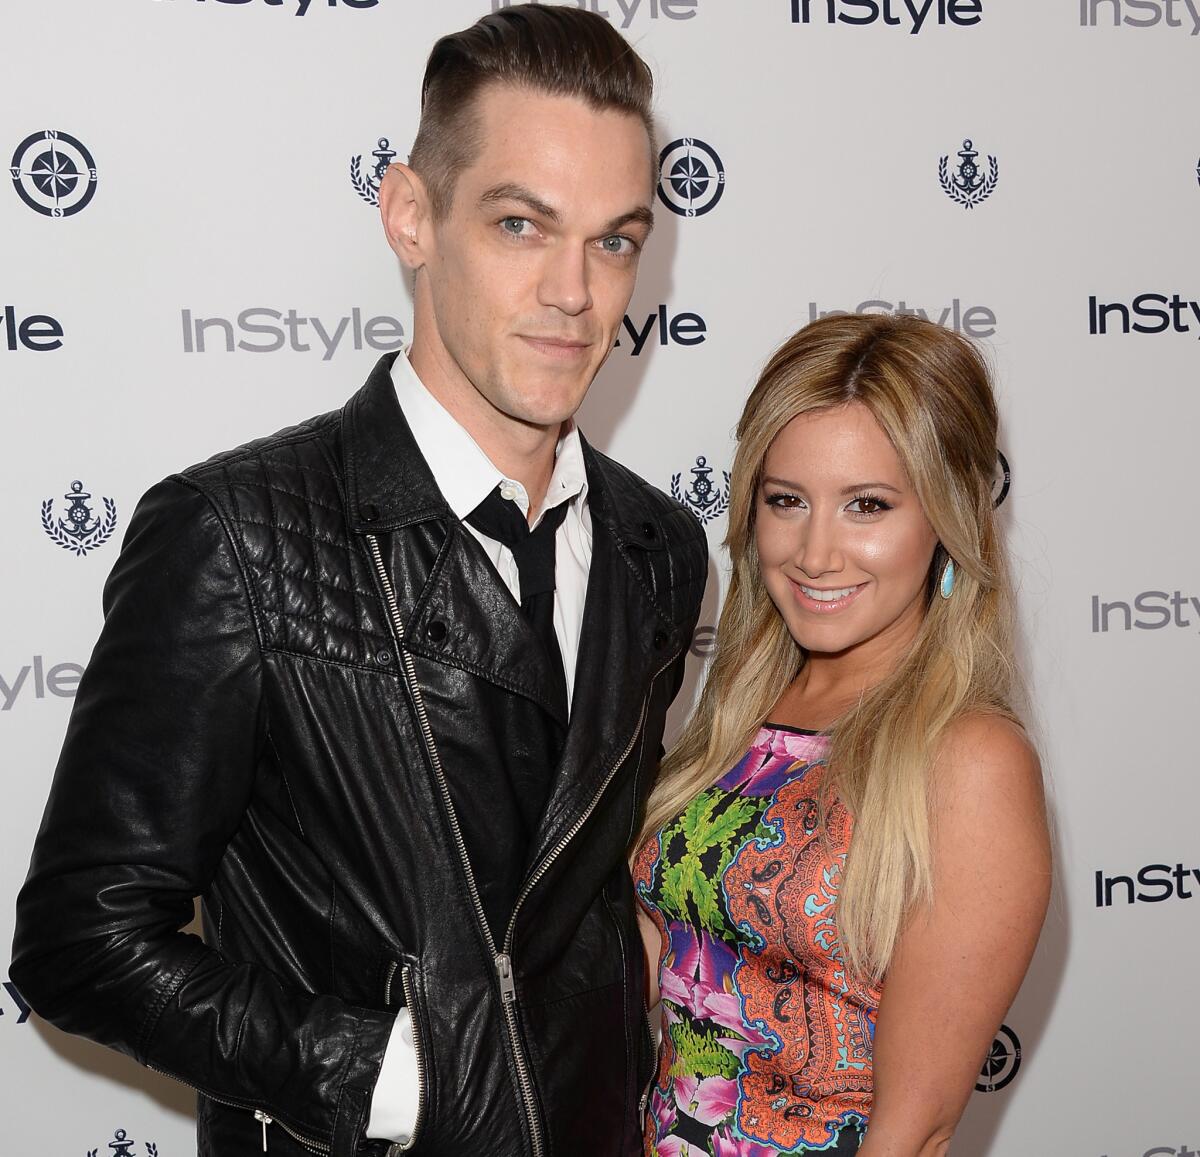 Ashley Tisdale talks about fiance Christopher French on "On Air With Ryan Seacrest."